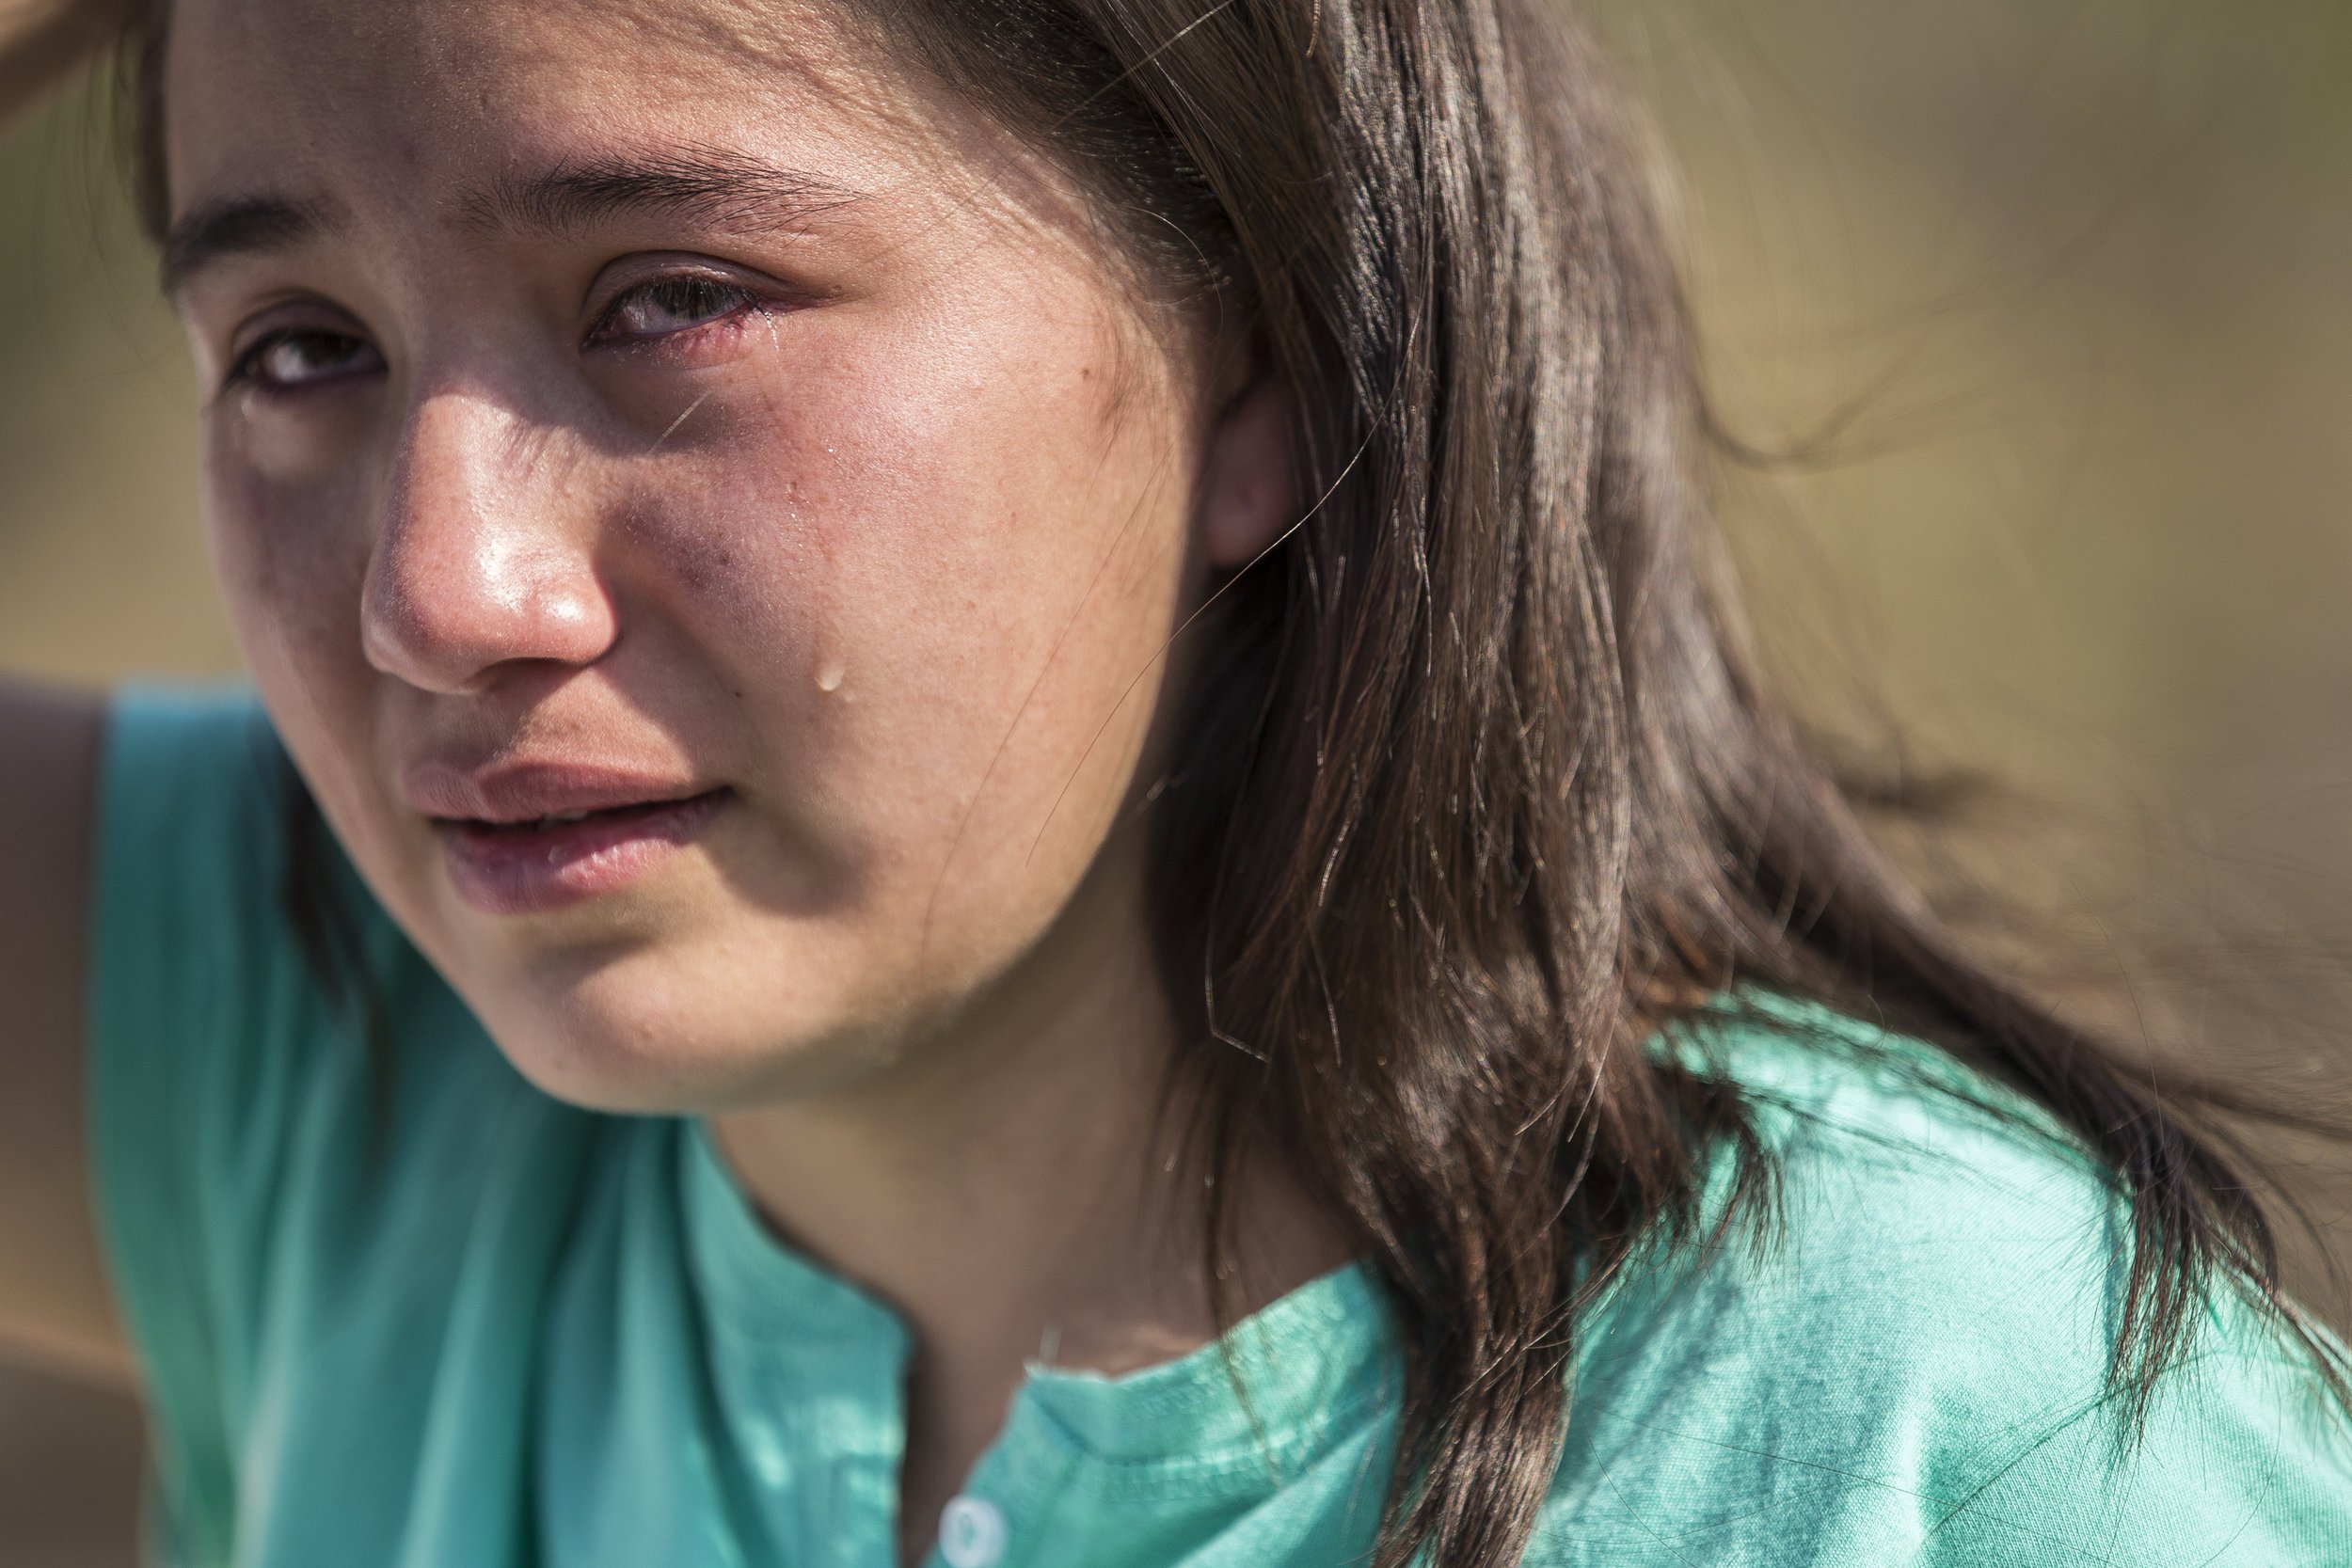  Daniela Berenice Martínez Rivera, a 17-year-old unaccompanied child migrant from El Salvador who voluntarily turned herself in to Border Patrol agents near Roma, TX, on Mar. 8, 2016. Photo by Martin do Nascimento 